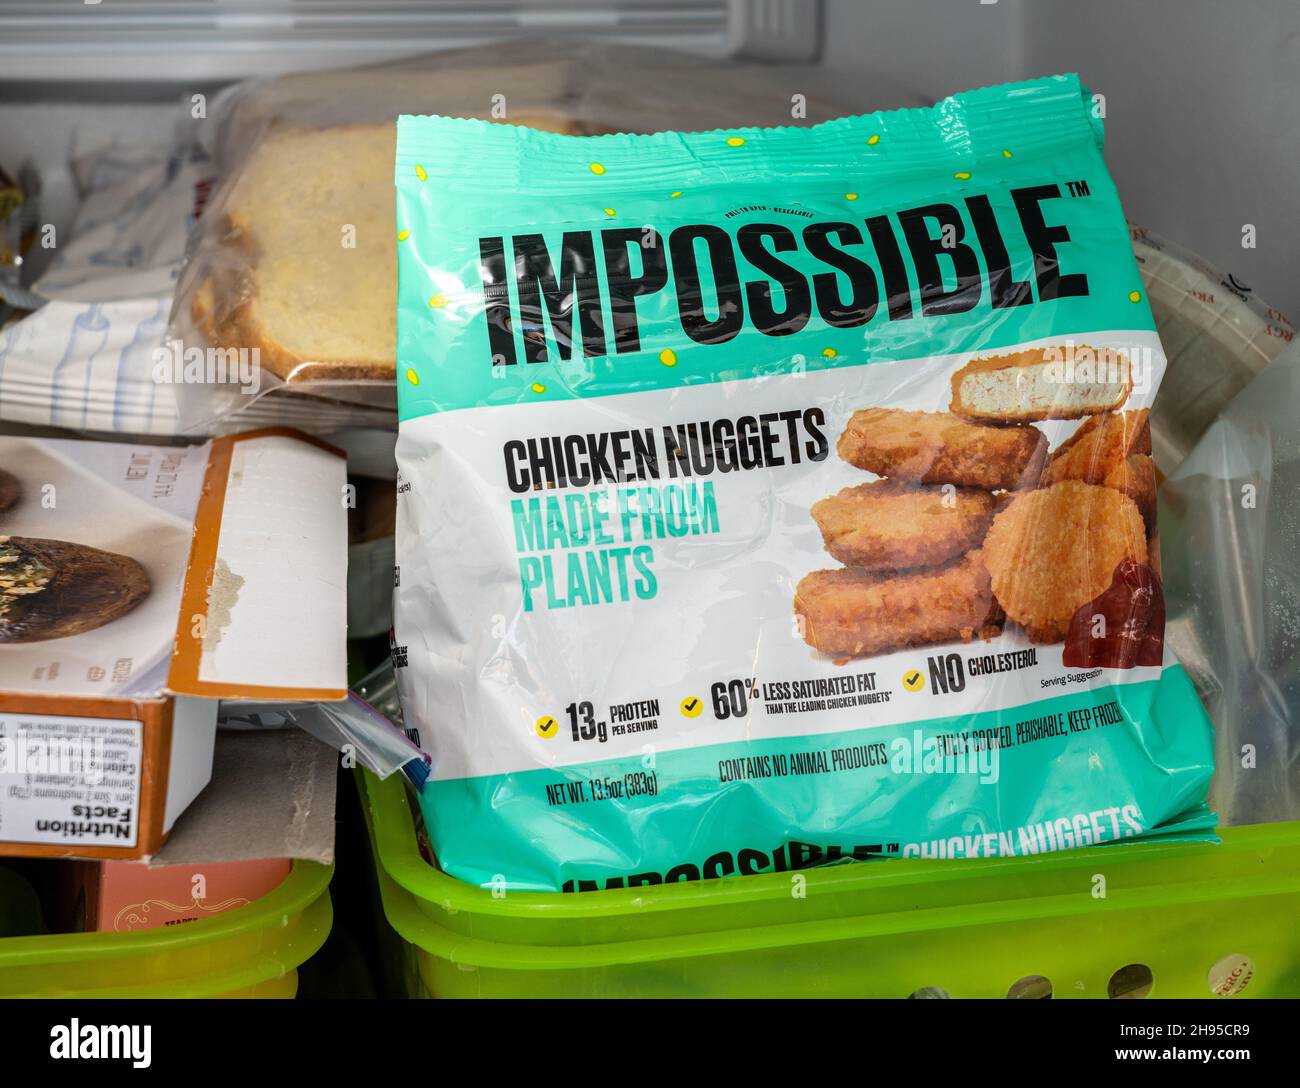 MORGANTOWN, WV - 4 November 2021: Packaging for Impossible Foods chicken nuggets made from plants inside domestic freezer Stock Photo